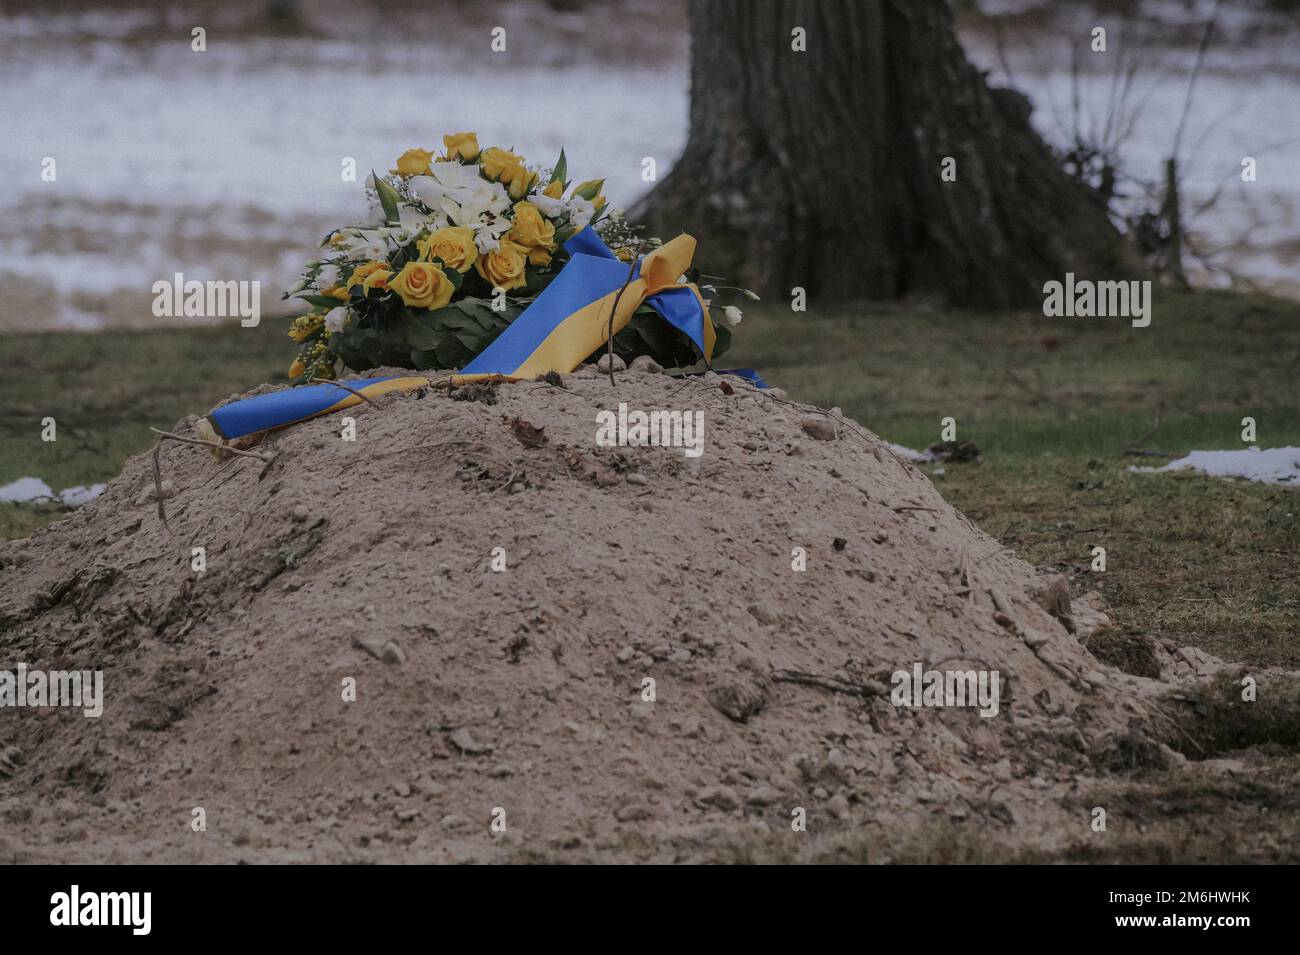 One recently dug grave with burial ornament Stock Photo